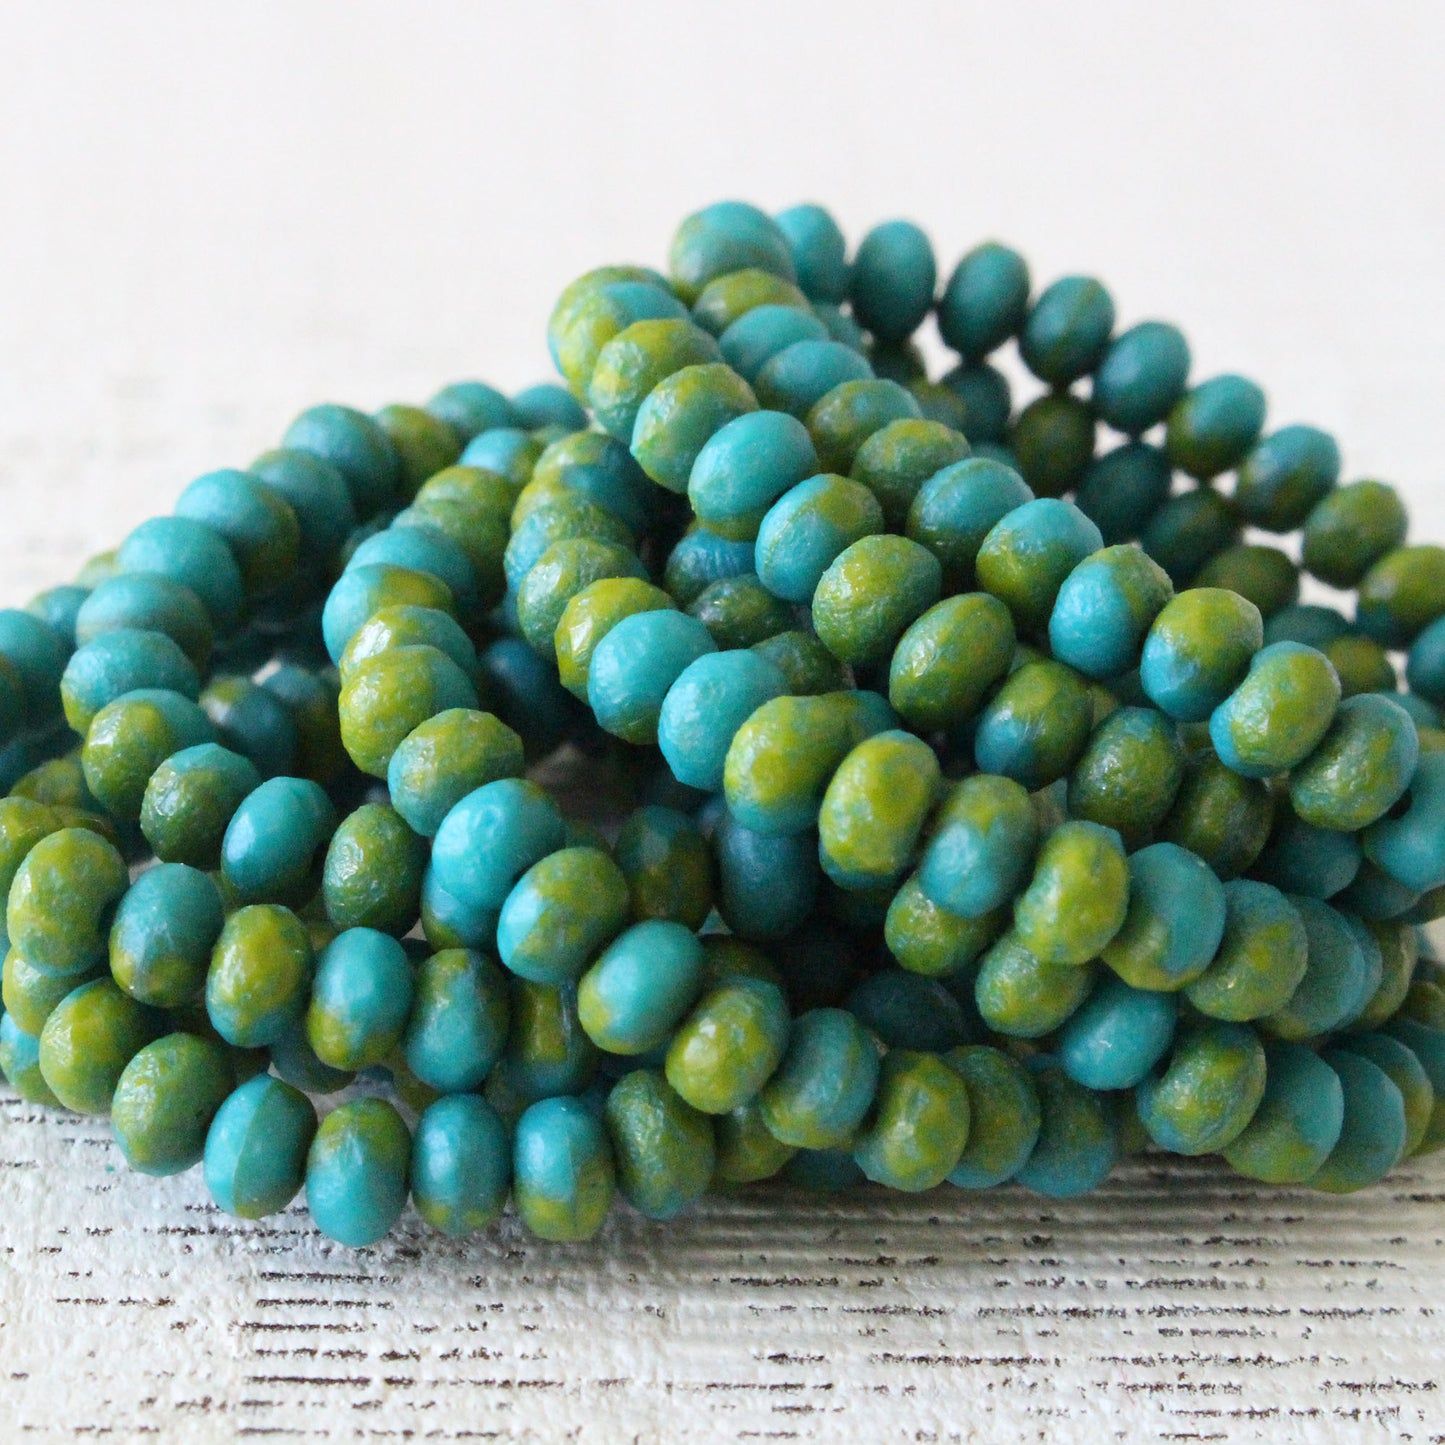 Load image into Gallery viewer, 3x5mm Rondelle Beads - Matte Turquoise Aqua - 30 Beads
